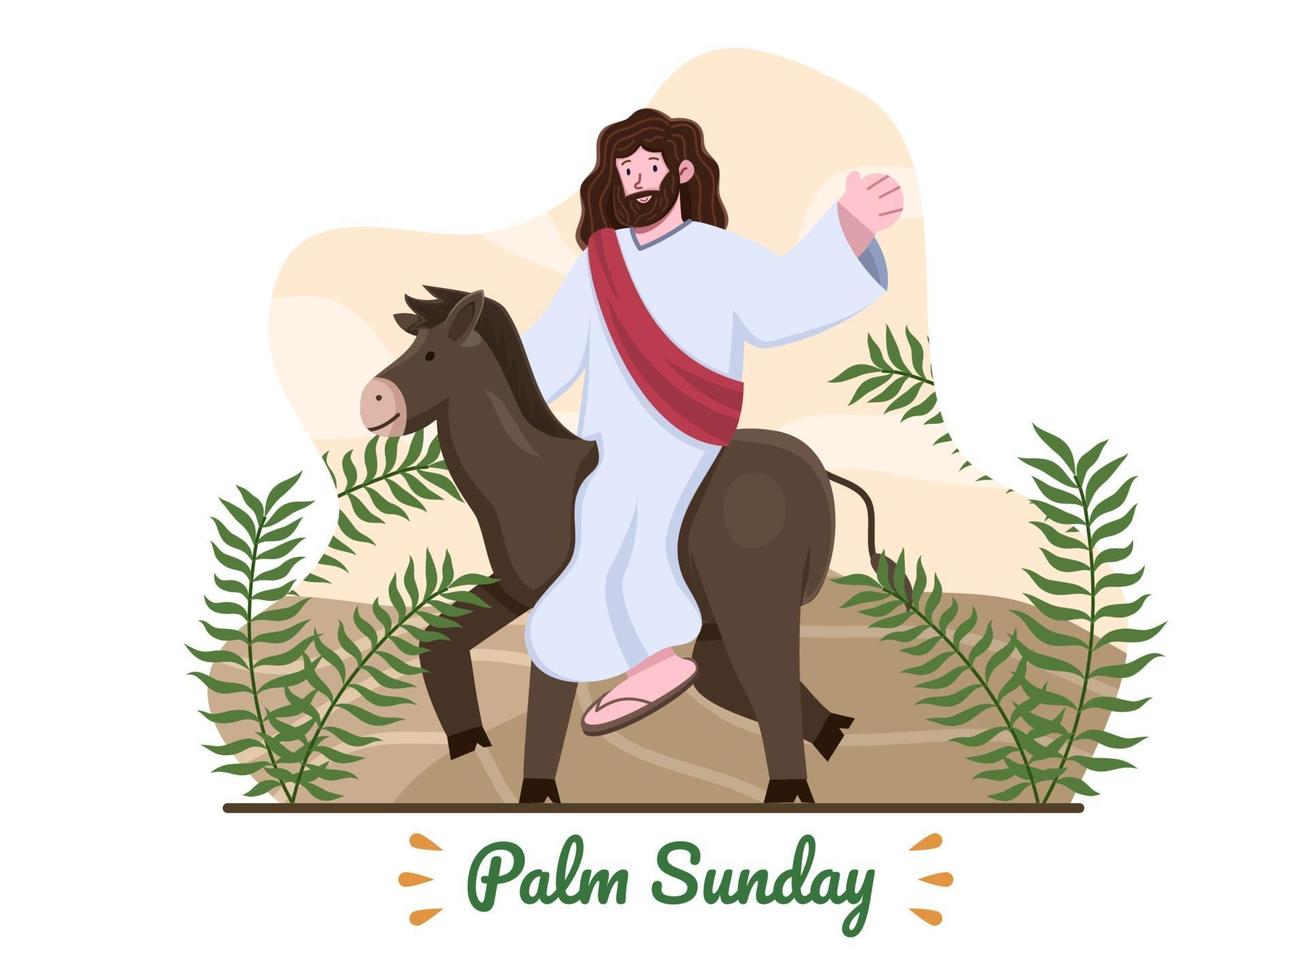 Palm Sunday illustration with Jesus ride a donkey and with palm leaves. Jesus riding donkey entering Jerusalem. Christian Palm Sunday religious holiday. Suitable for greeting card, banner, postcard, web, etc vector